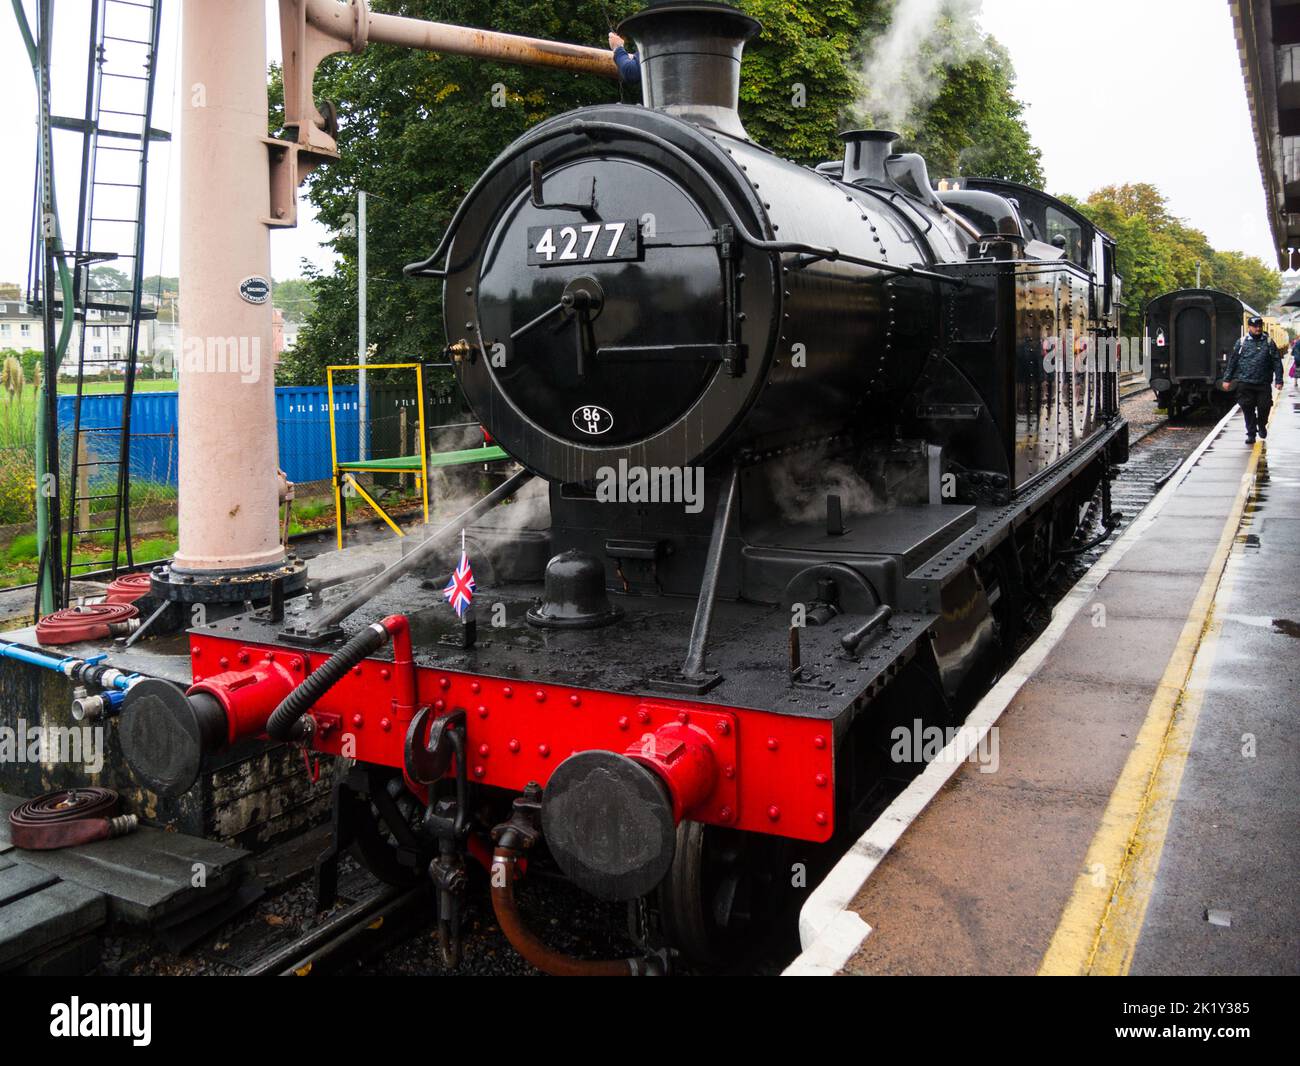 Engine No 4277 of Dartmouth Steam Railway in Paignton Railway Station Devon England UK getting ready to depart for journey to Dartmouth Stock Photo